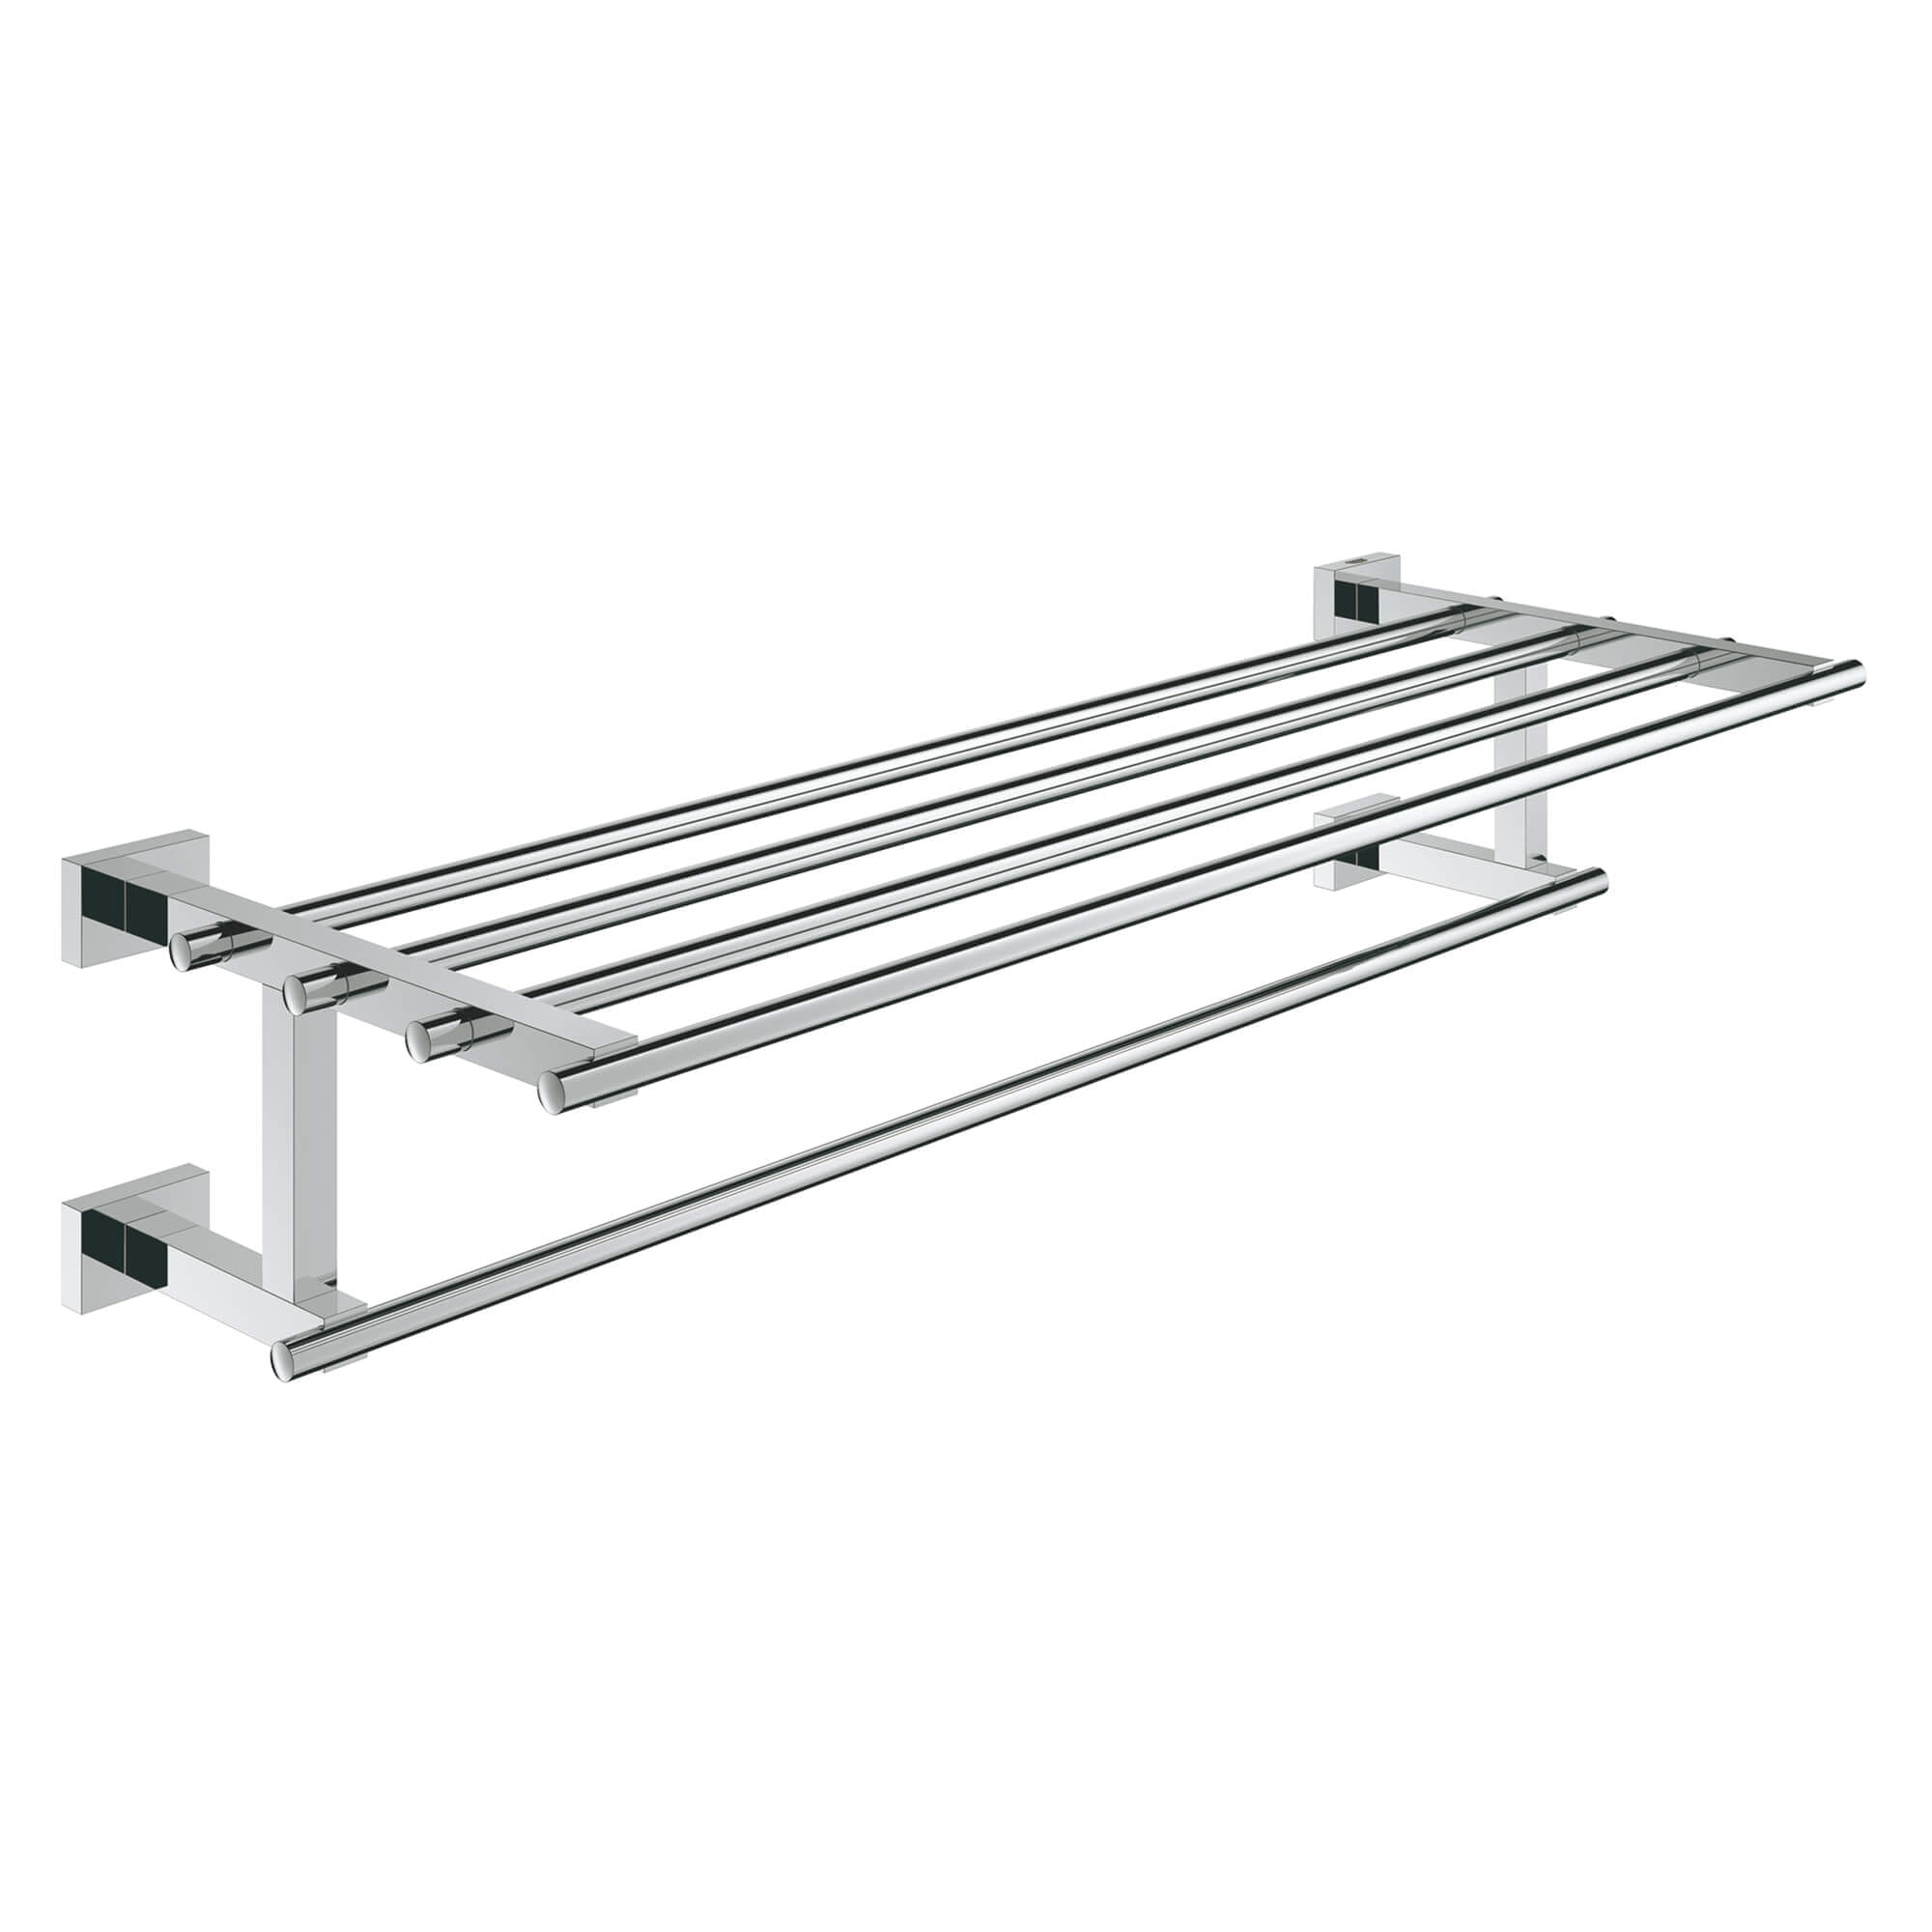 GROHE Towel Rack Essentials Authentic with 5 Towel Bars in StarLight Chrome 8a1